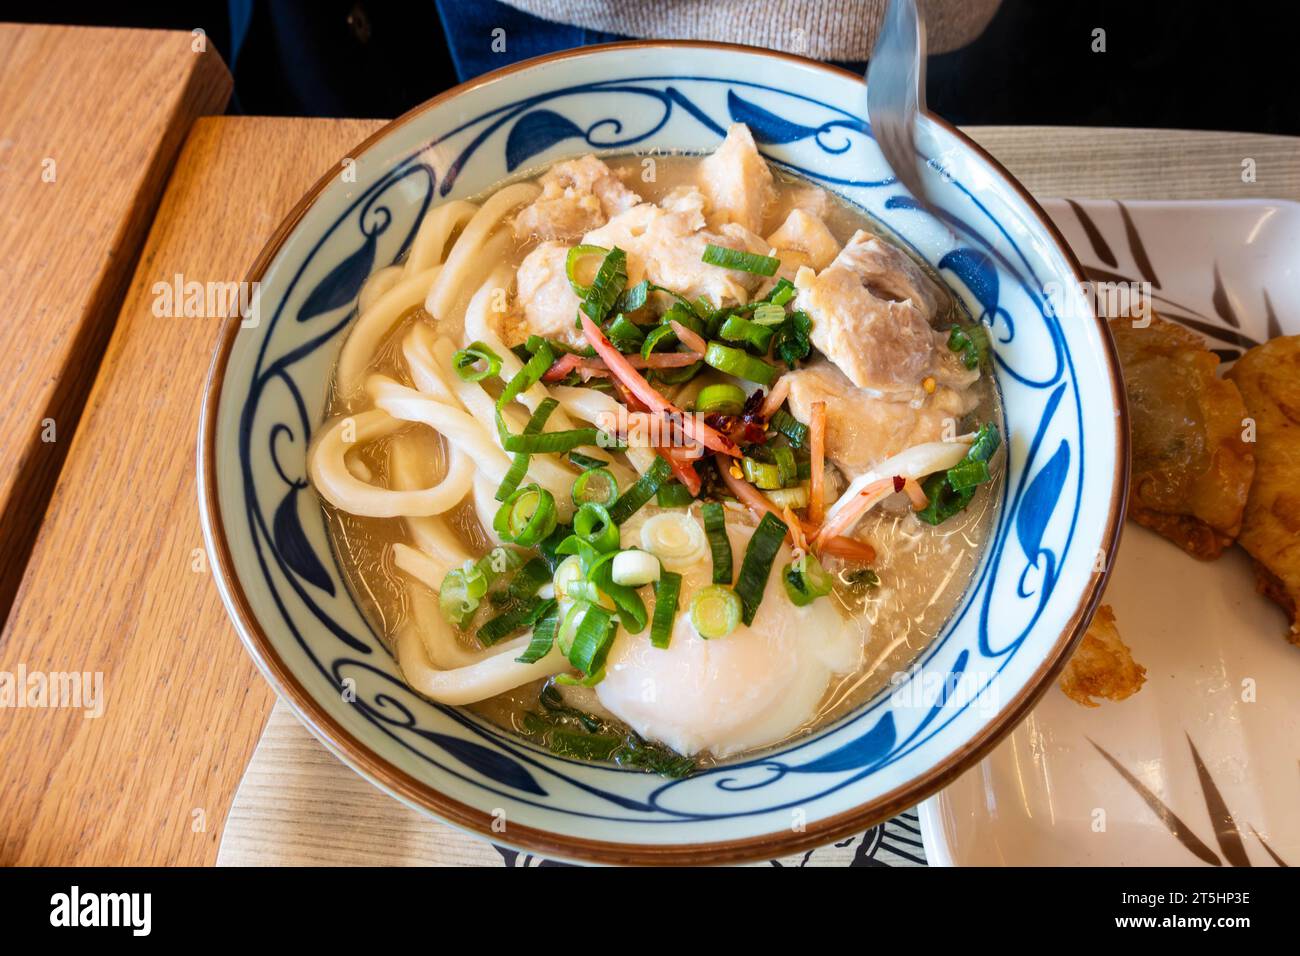 Chicken paitan, a Japanese dish with udon noodles and chicken served in a broth. Stock Photo